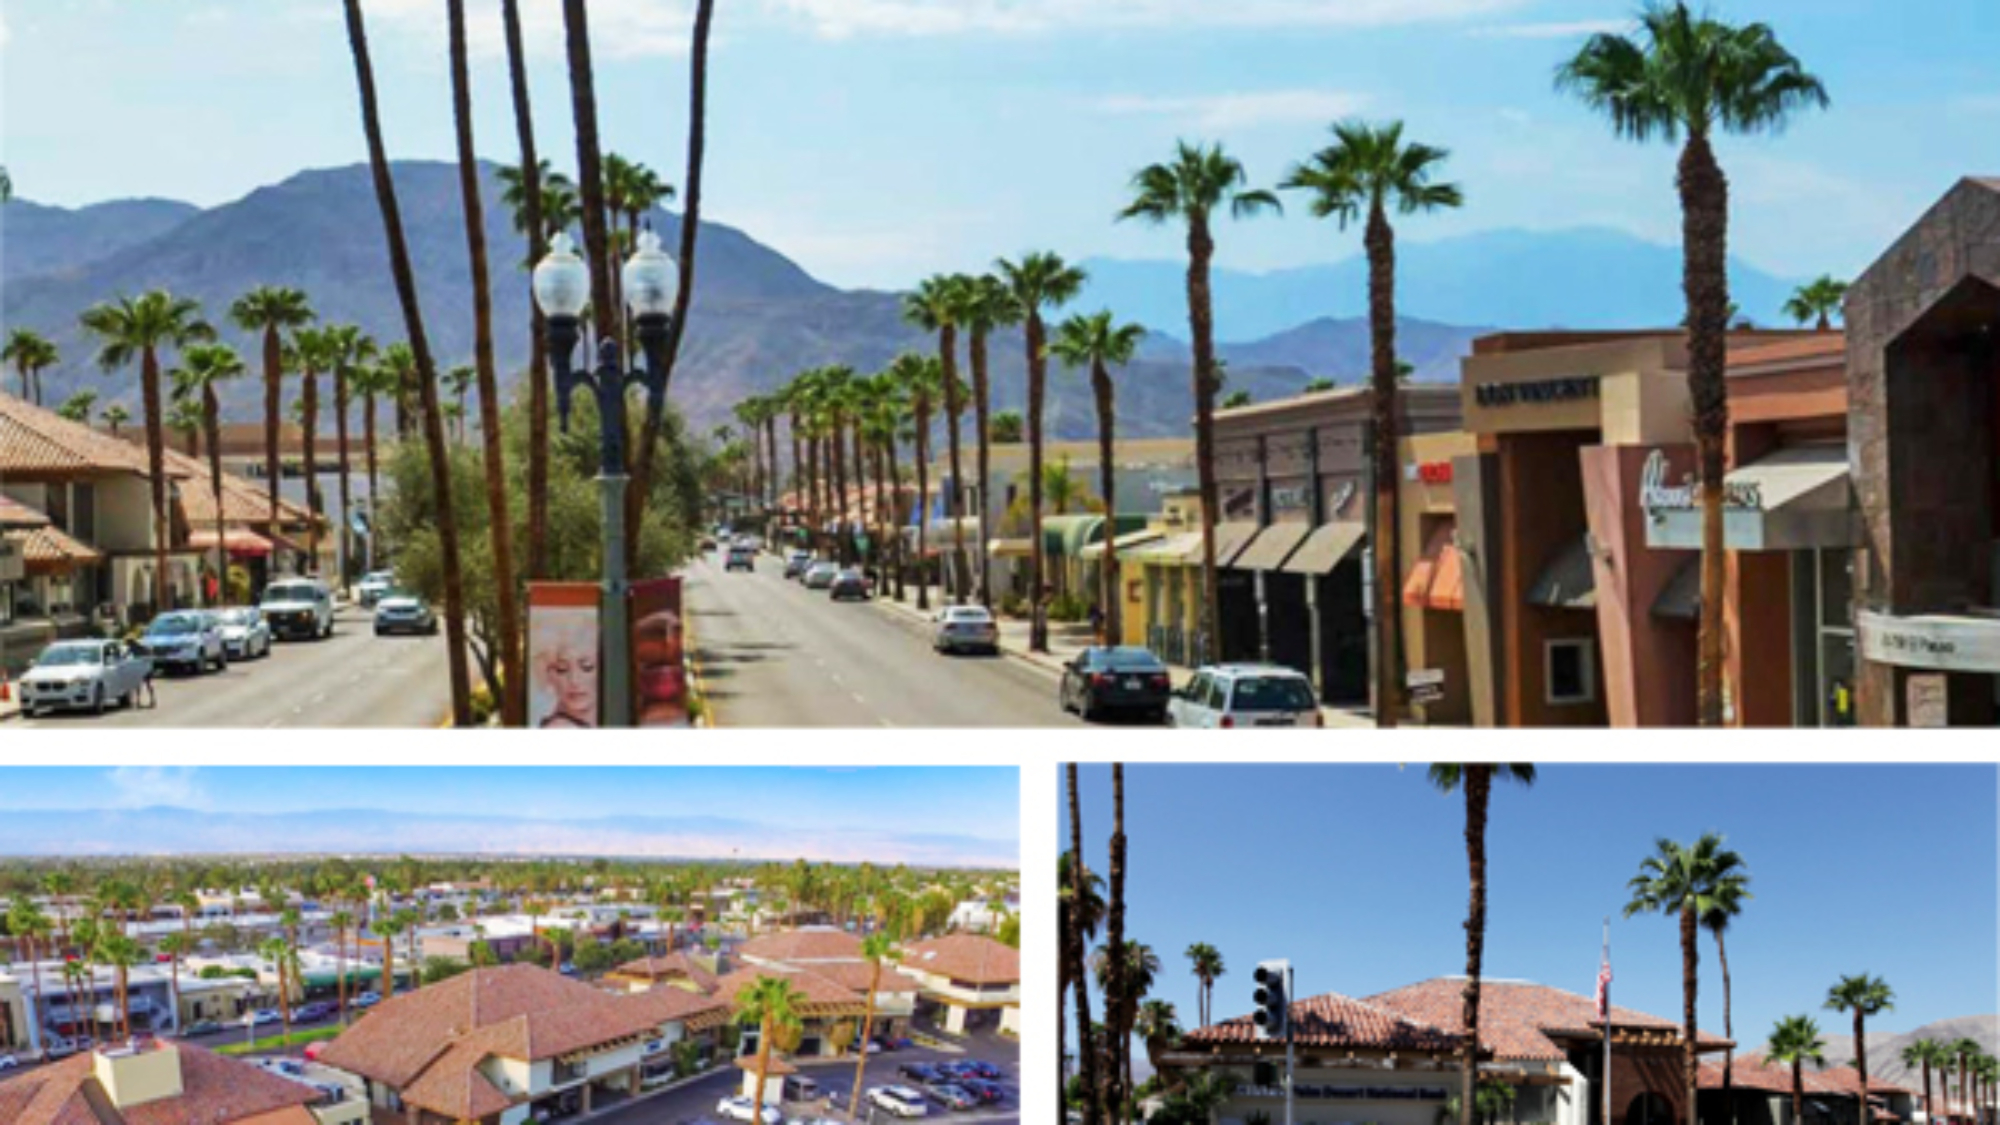 Plaza on El Paseo – the “Rodeo Drive” of Palm Desert – TWS